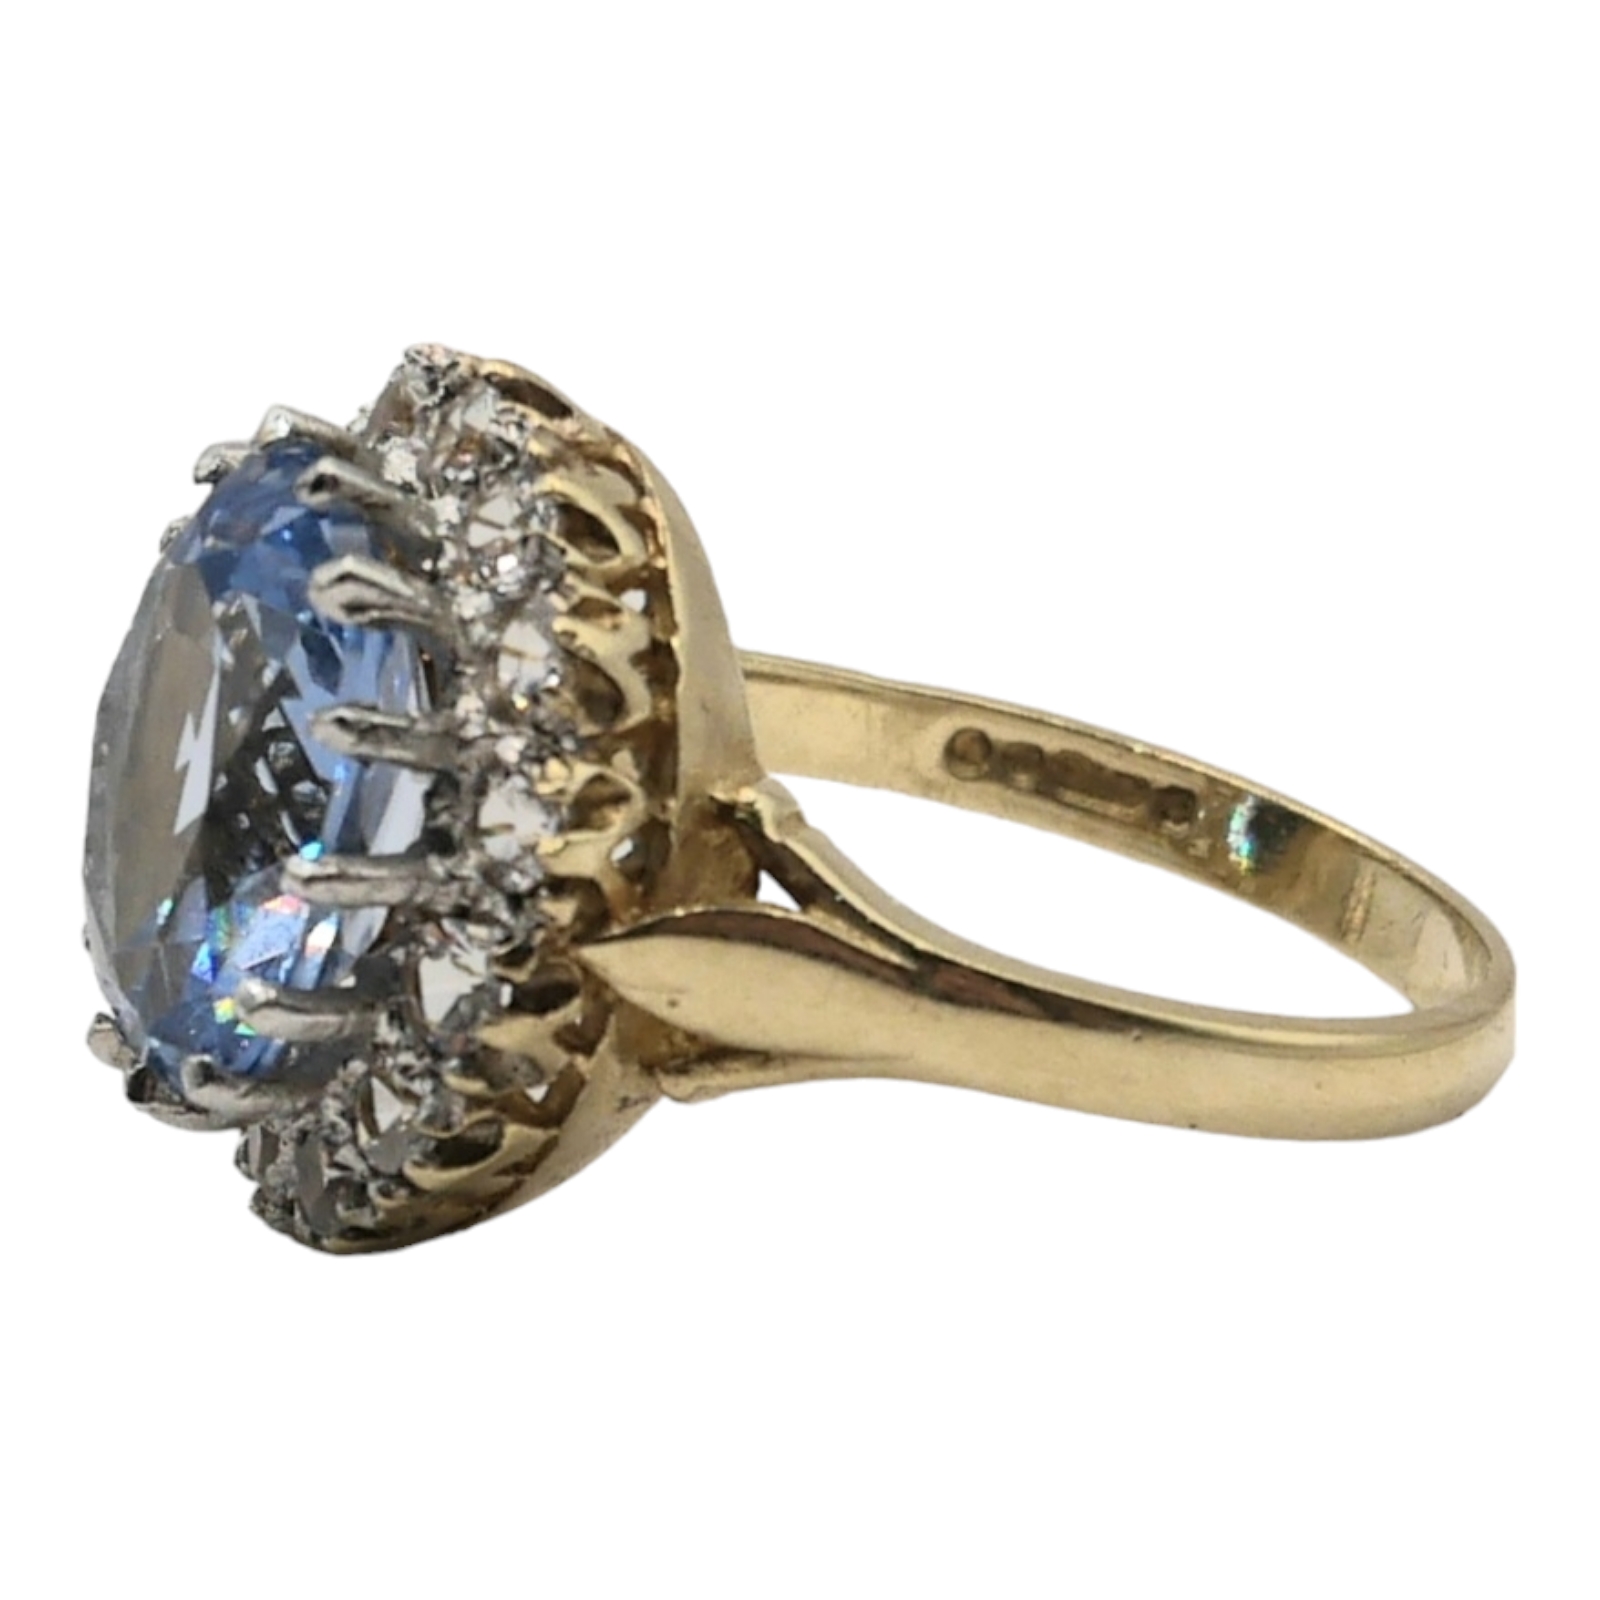 A VINTAGE 9CT GOLD, BLUE TOPAZ AND WHITE TANZANITE RING Having central oval cut blue topaz ( - Image 6 of 7